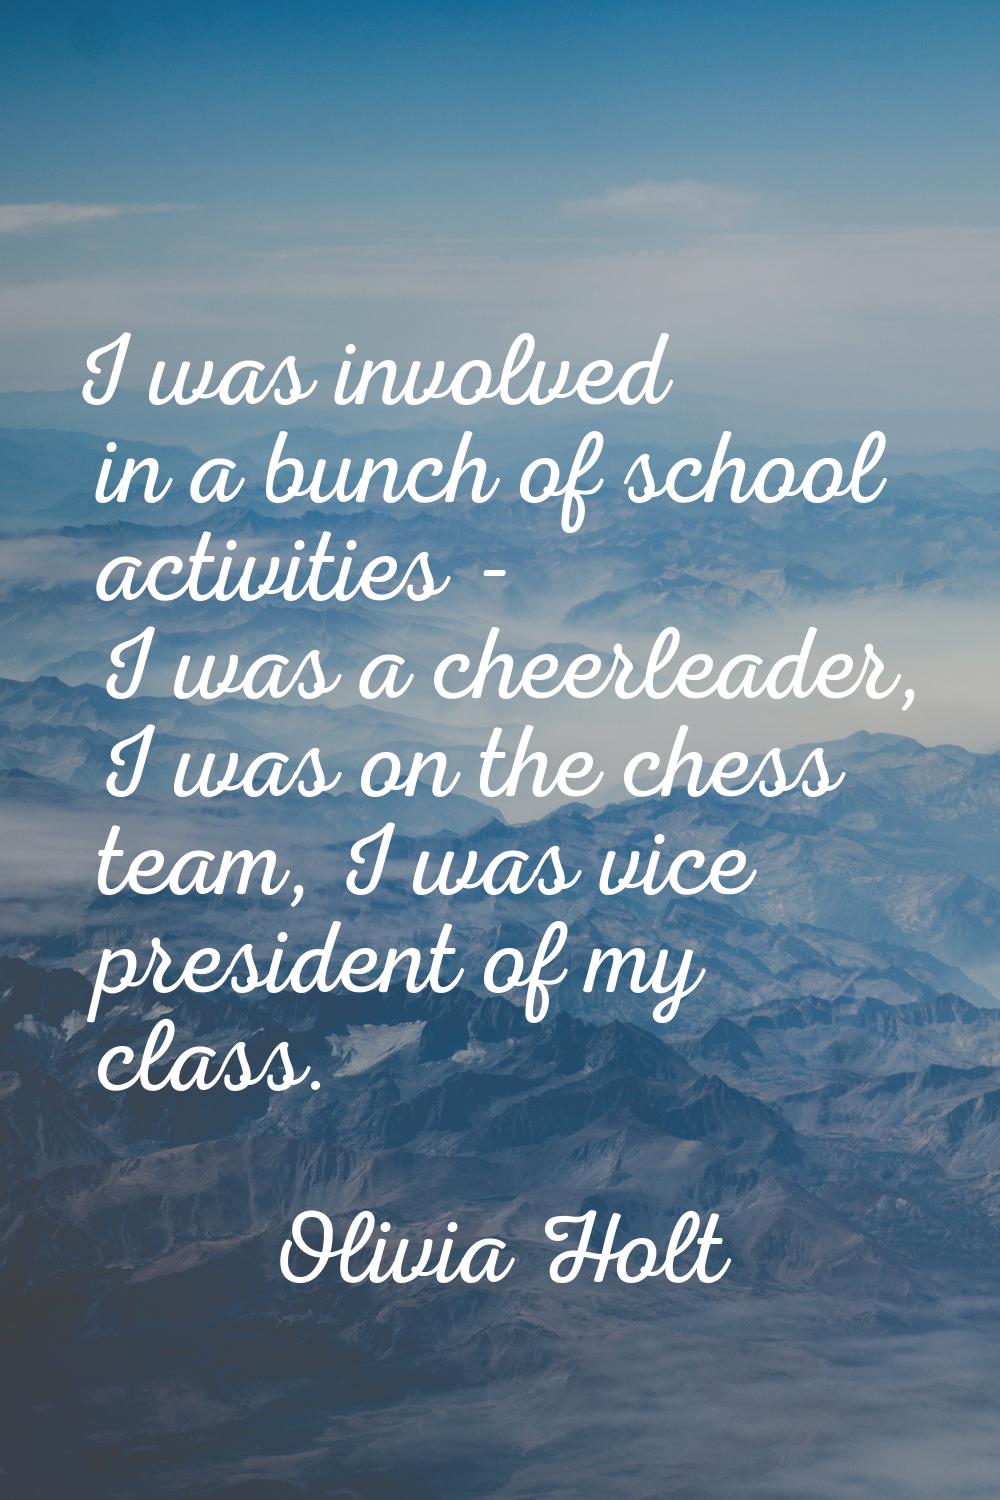 I was involved in a bunch of school activities - I was a cheerleader, I was on the chess team, I wa